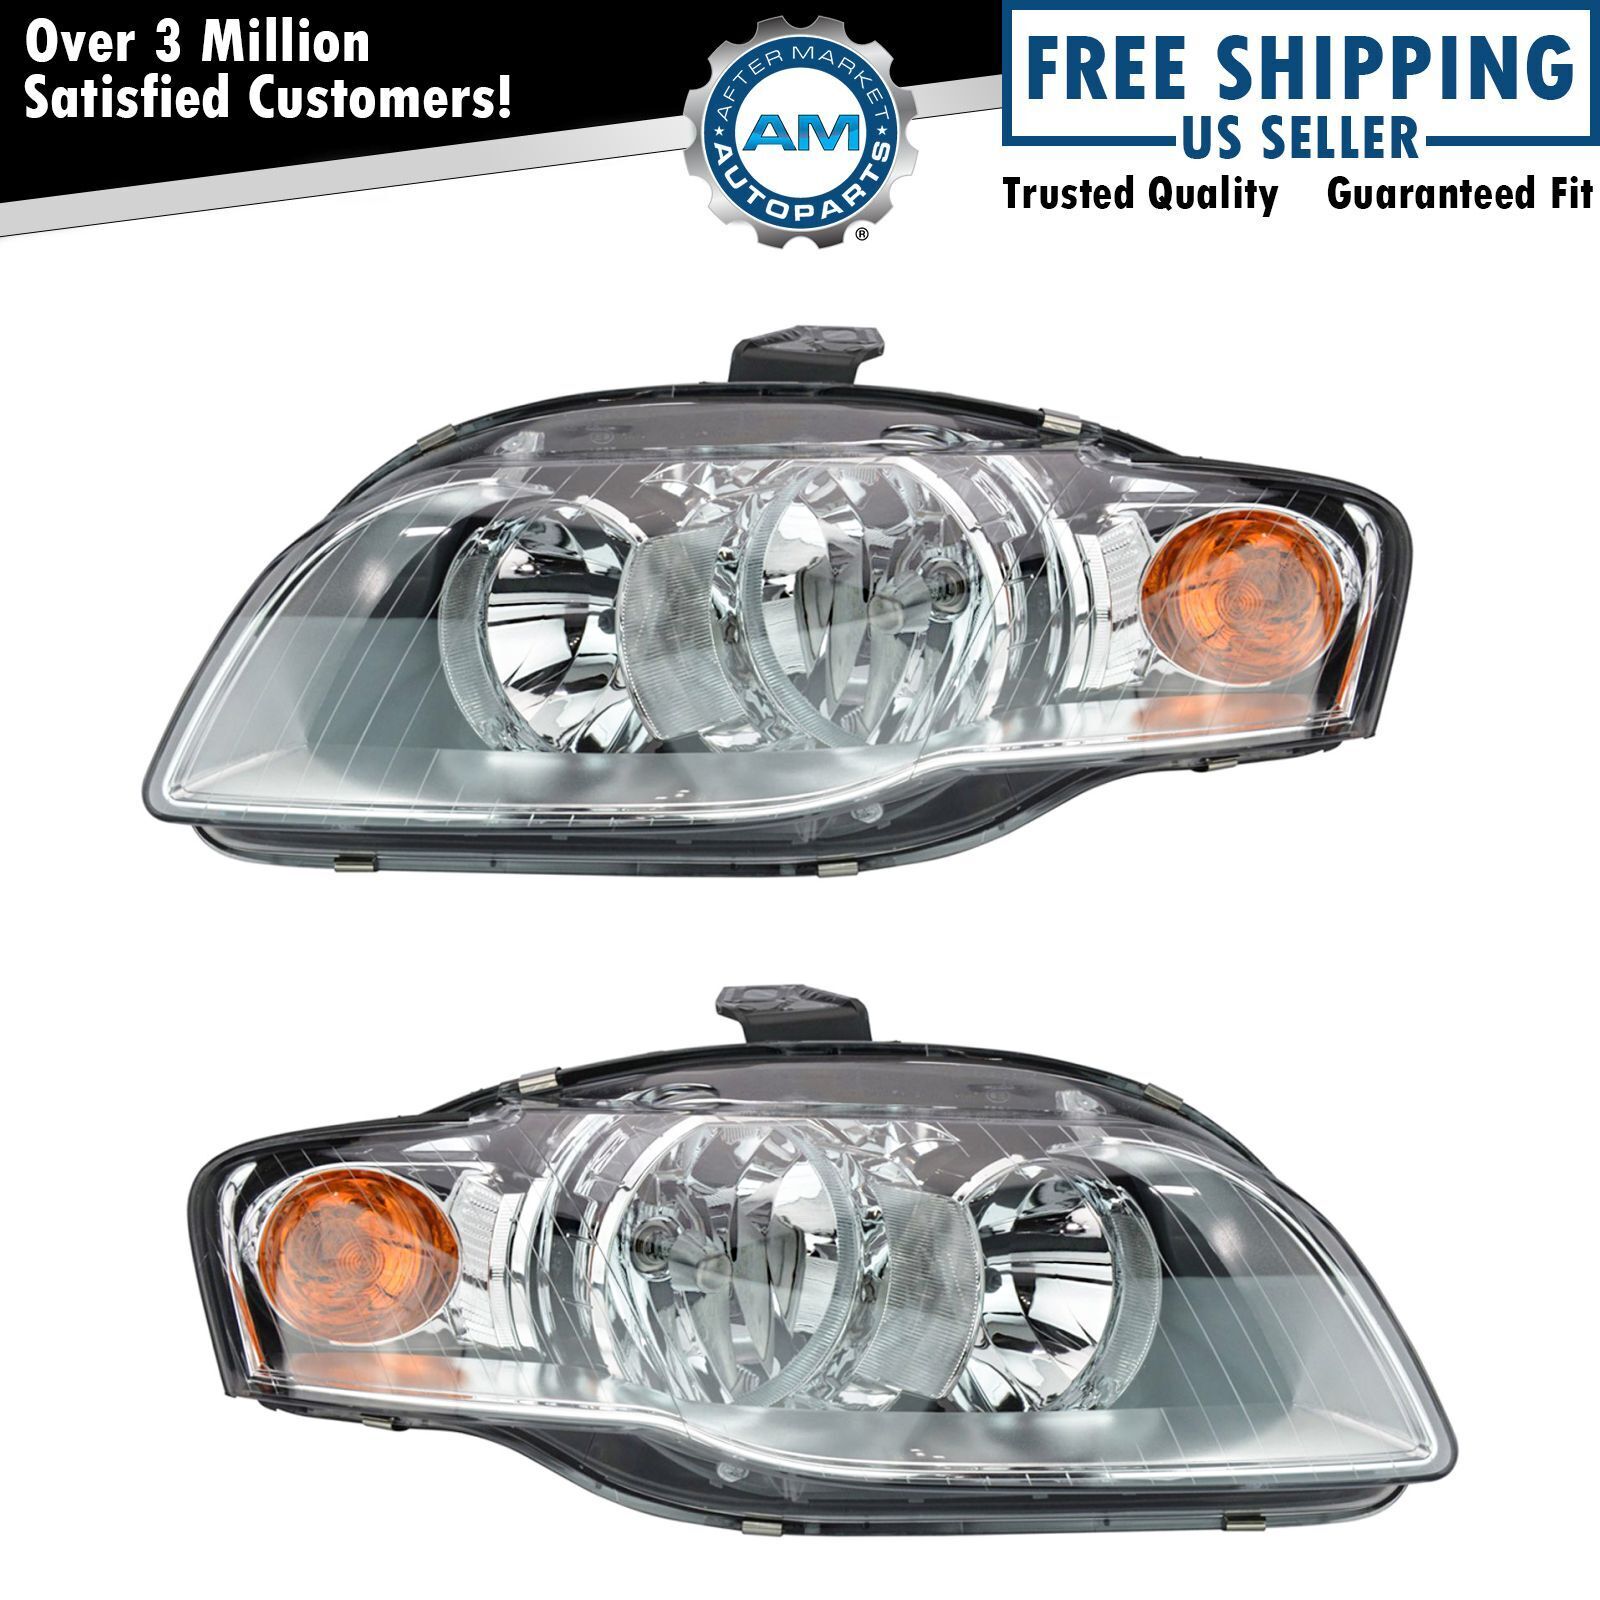 Headlights Headlamps Left & Right Pair Set Halogen NEW for Audi A4 S4